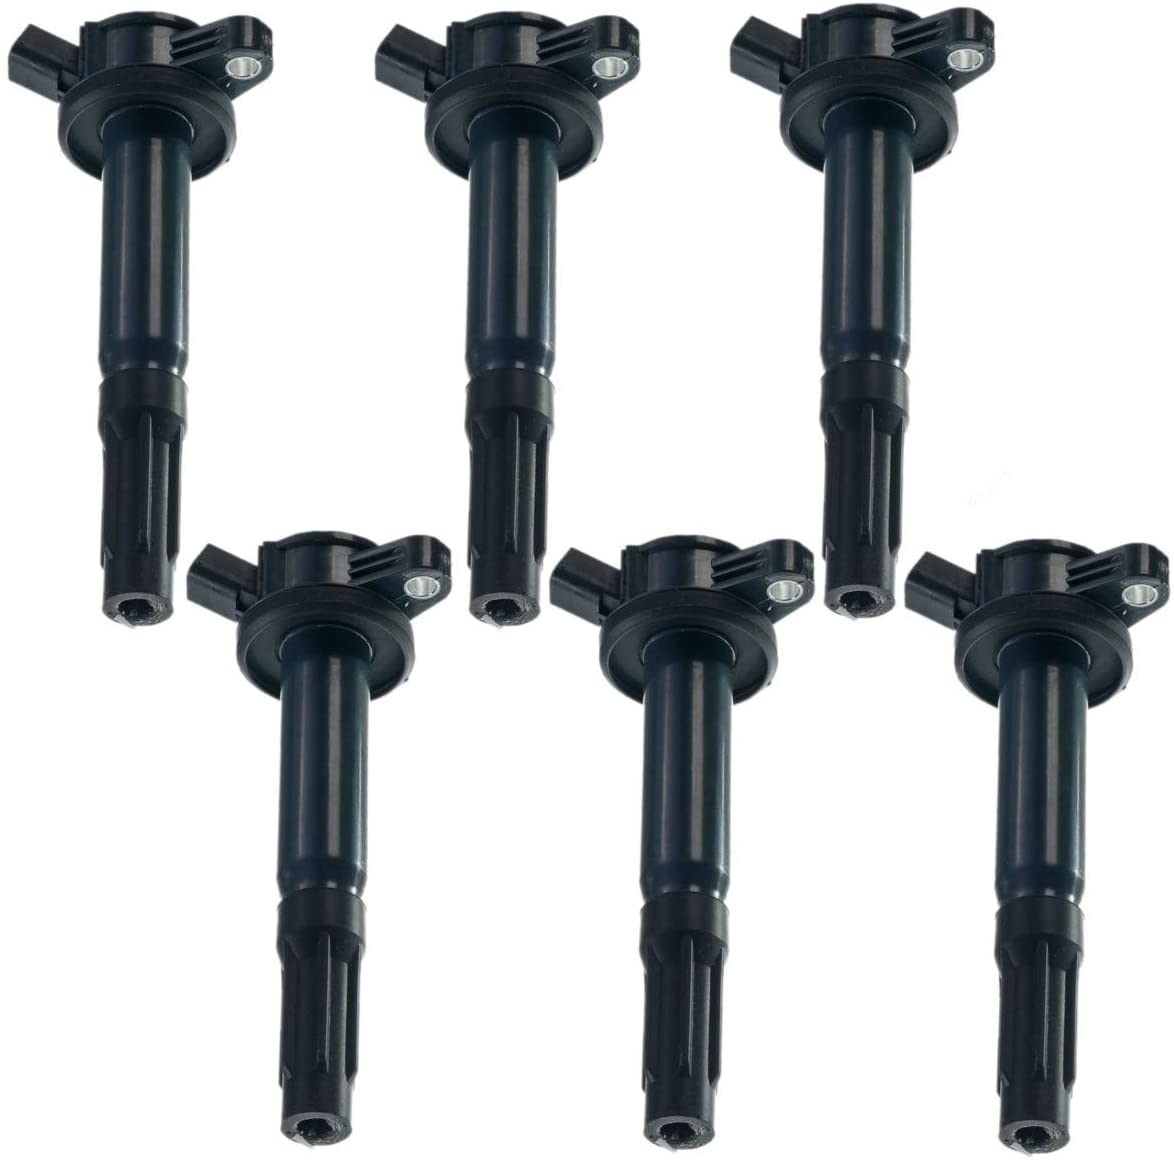 Set of 6 Ignition Coil Pack for Ford Escape Fusion Mercury Mariner Milan Mazda Tribute Lincoln Zephyr